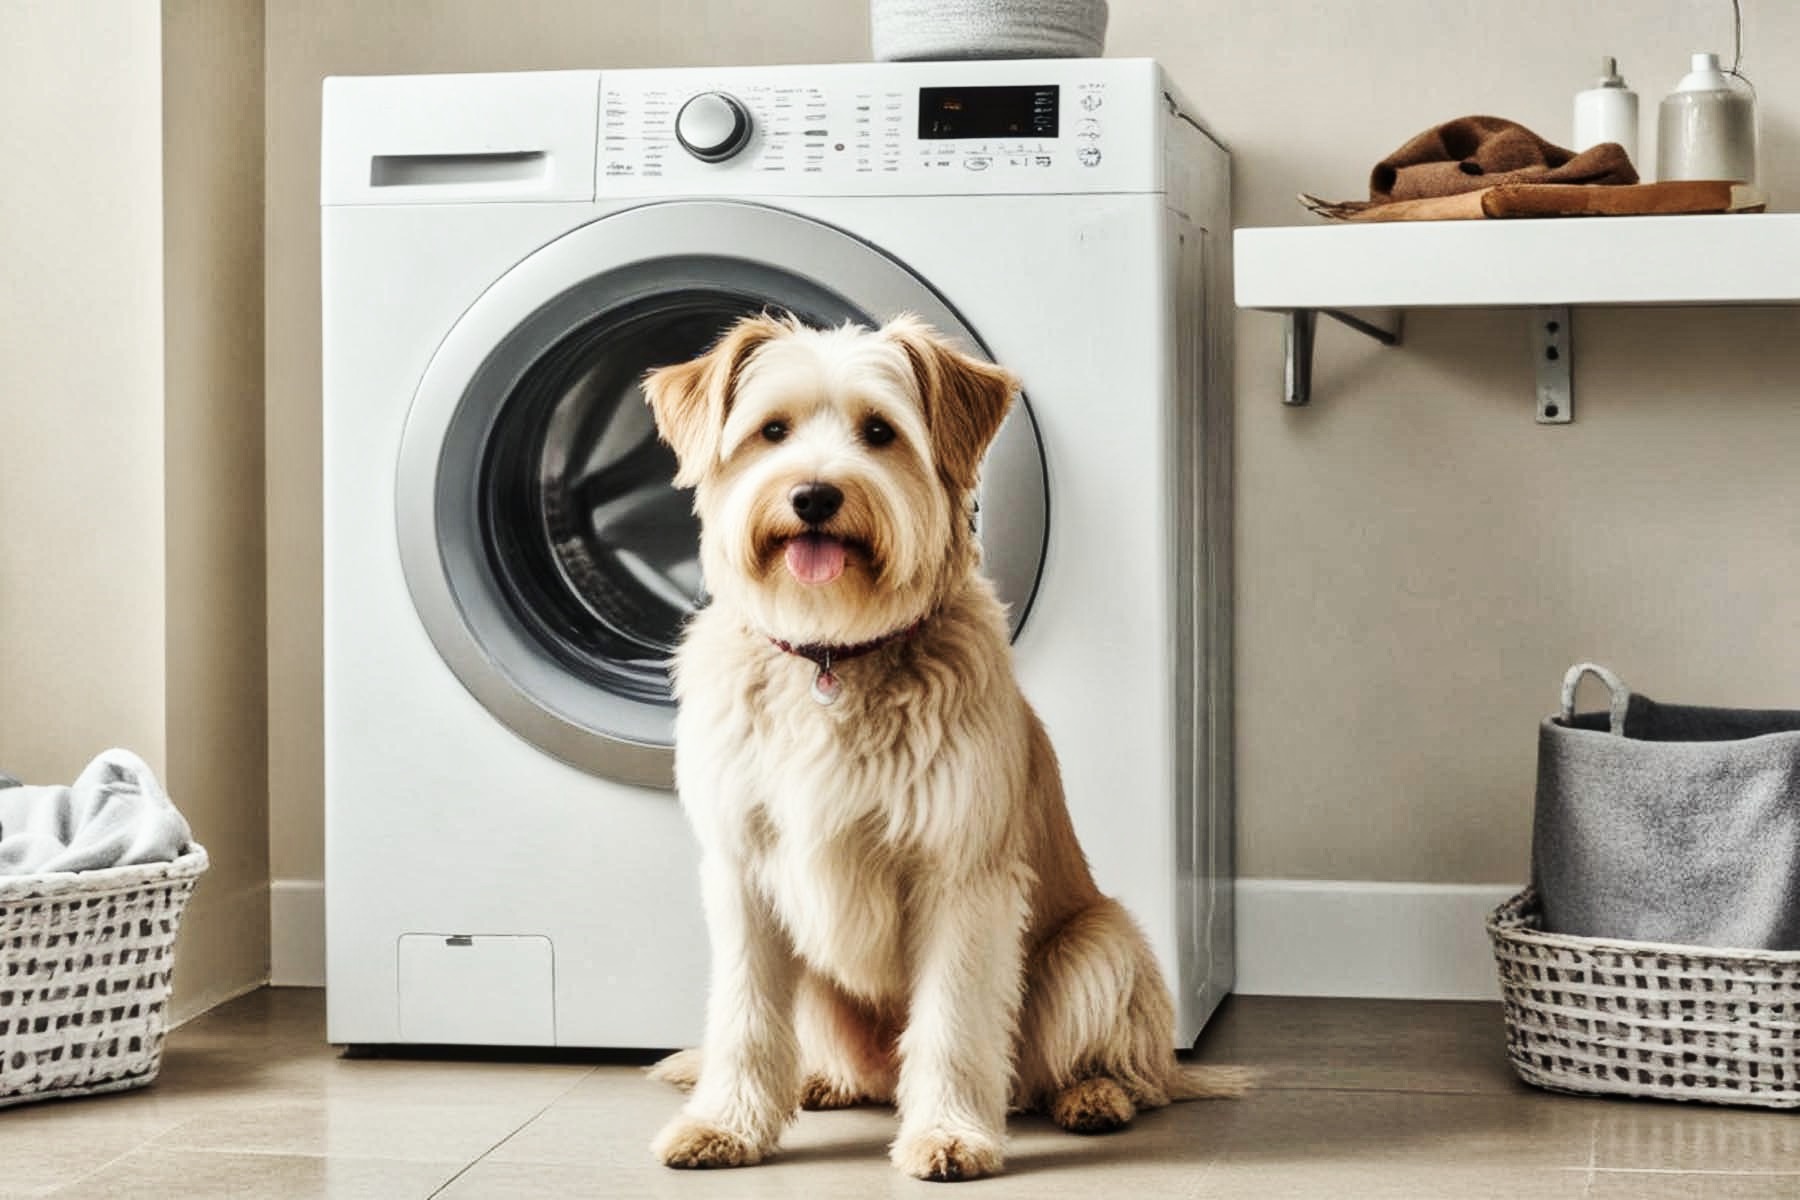 Georgetown's LG Washer Rescue: Keep Your Laundry Room Running Smoothly